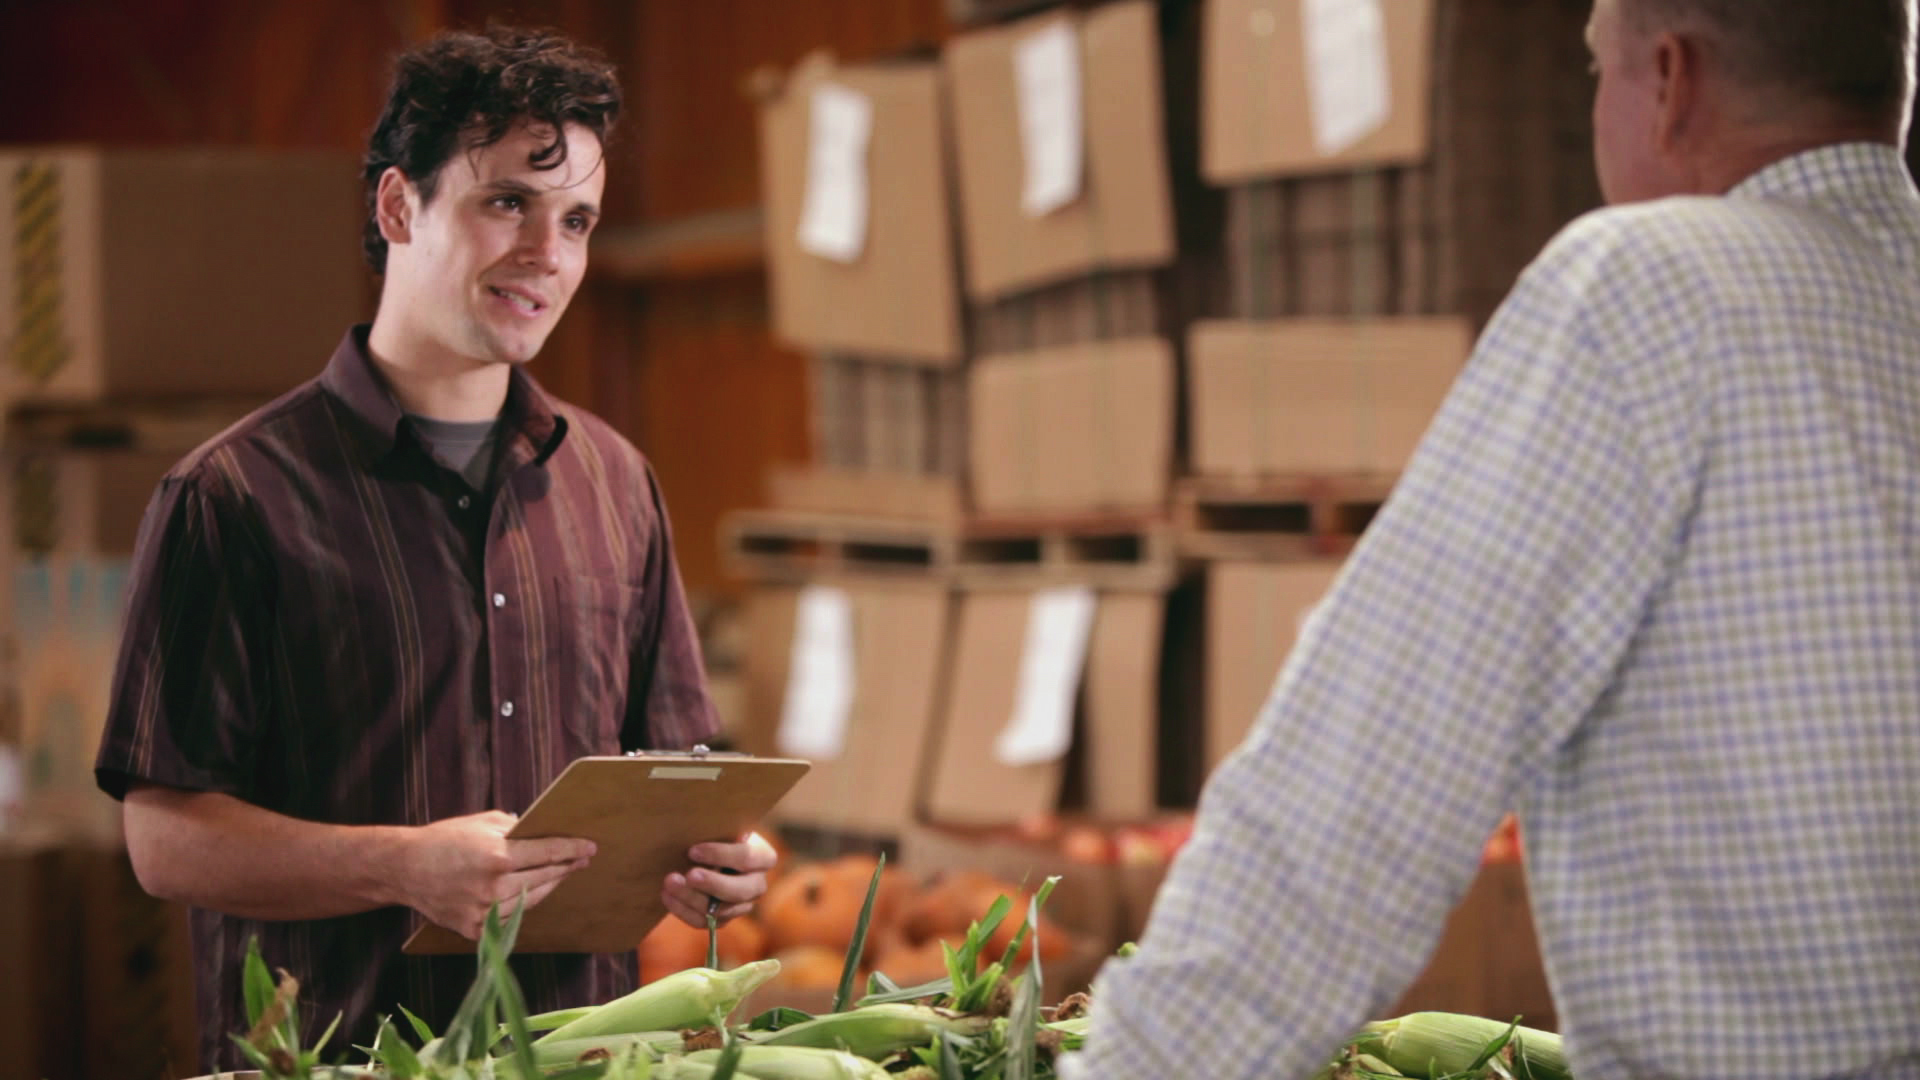 A photo of a man interviewing to a food supplier, holding a clipboard.